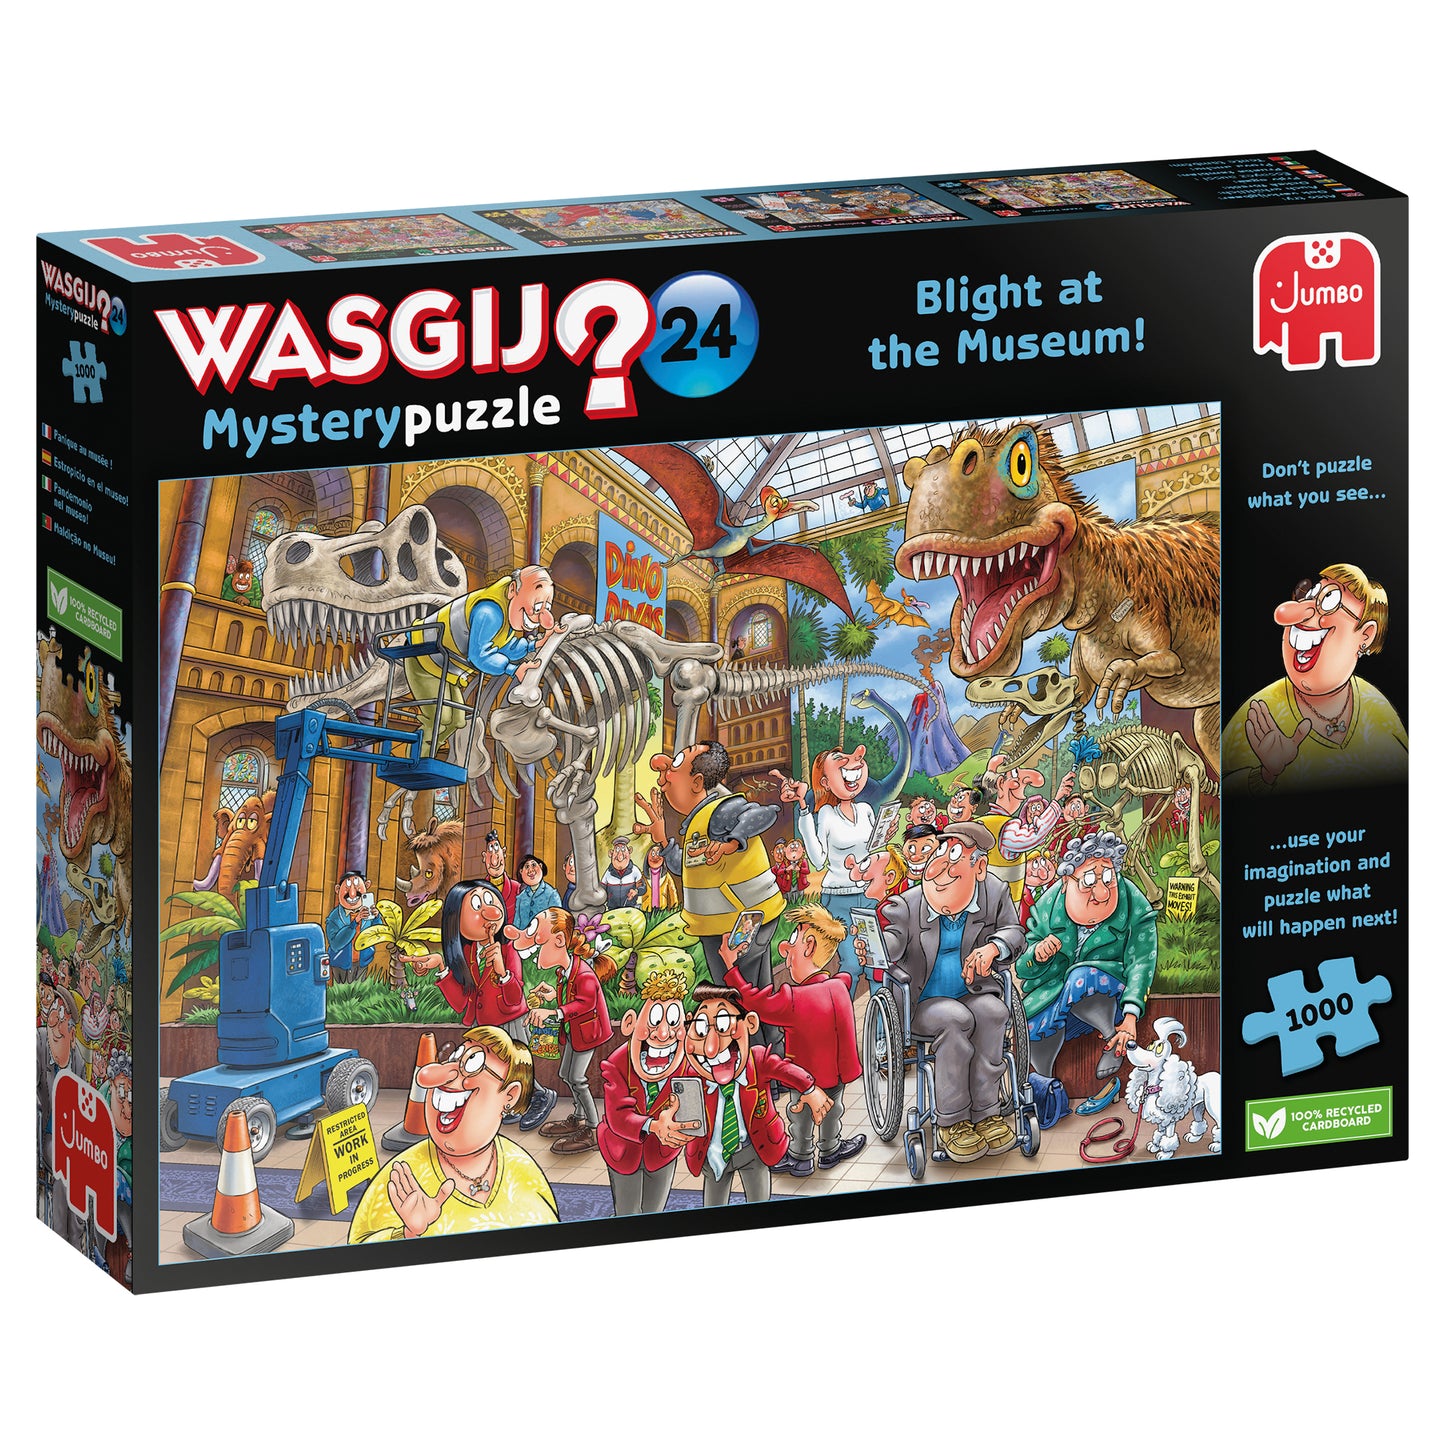 Wasgij Mystery 24 - Blight at the Museum! - 1000 Piece Jigsaw Puzzle